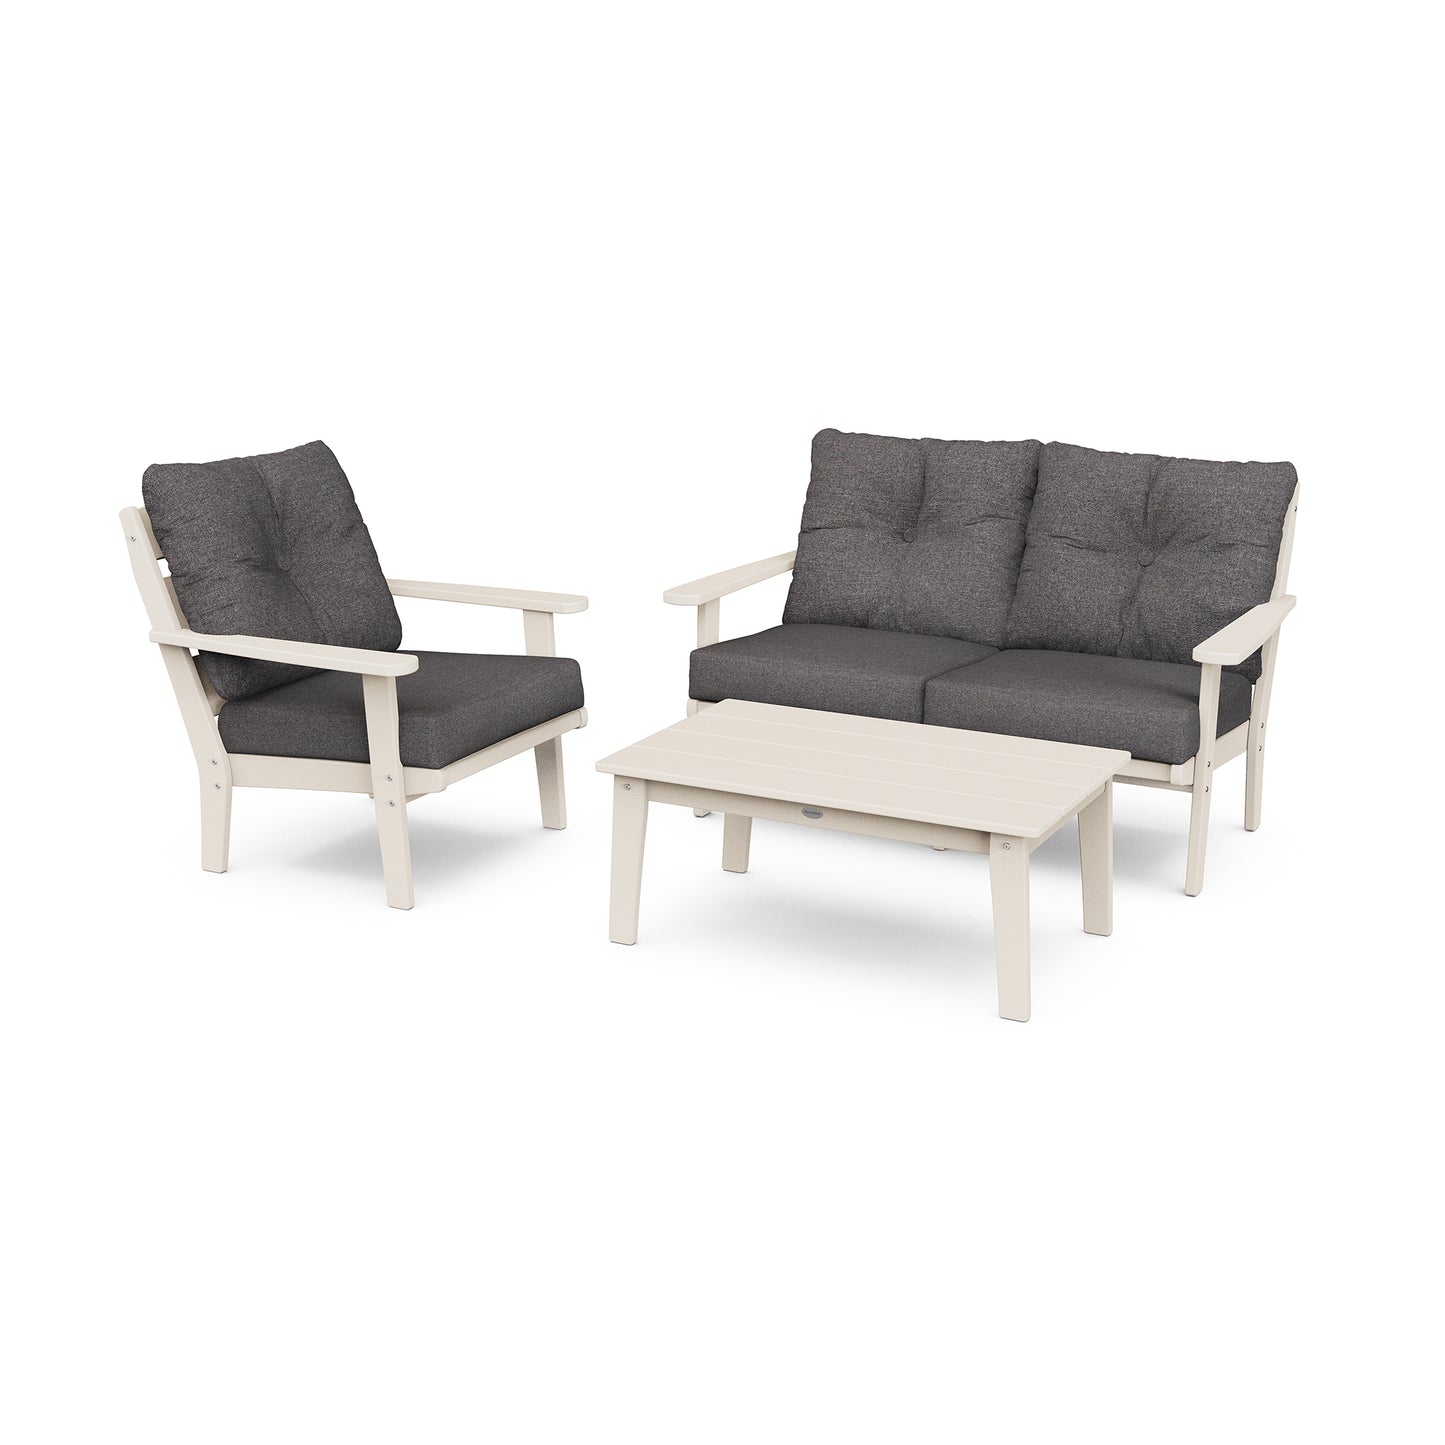 Outdoor furniture set featuring two cushioned armchairs and a small rectangular table, all constructed with POLYWOOD Lakeside 3-Piece Deep Seating Set frames in a coordinating white and gray color scheme, isolated on a white background.